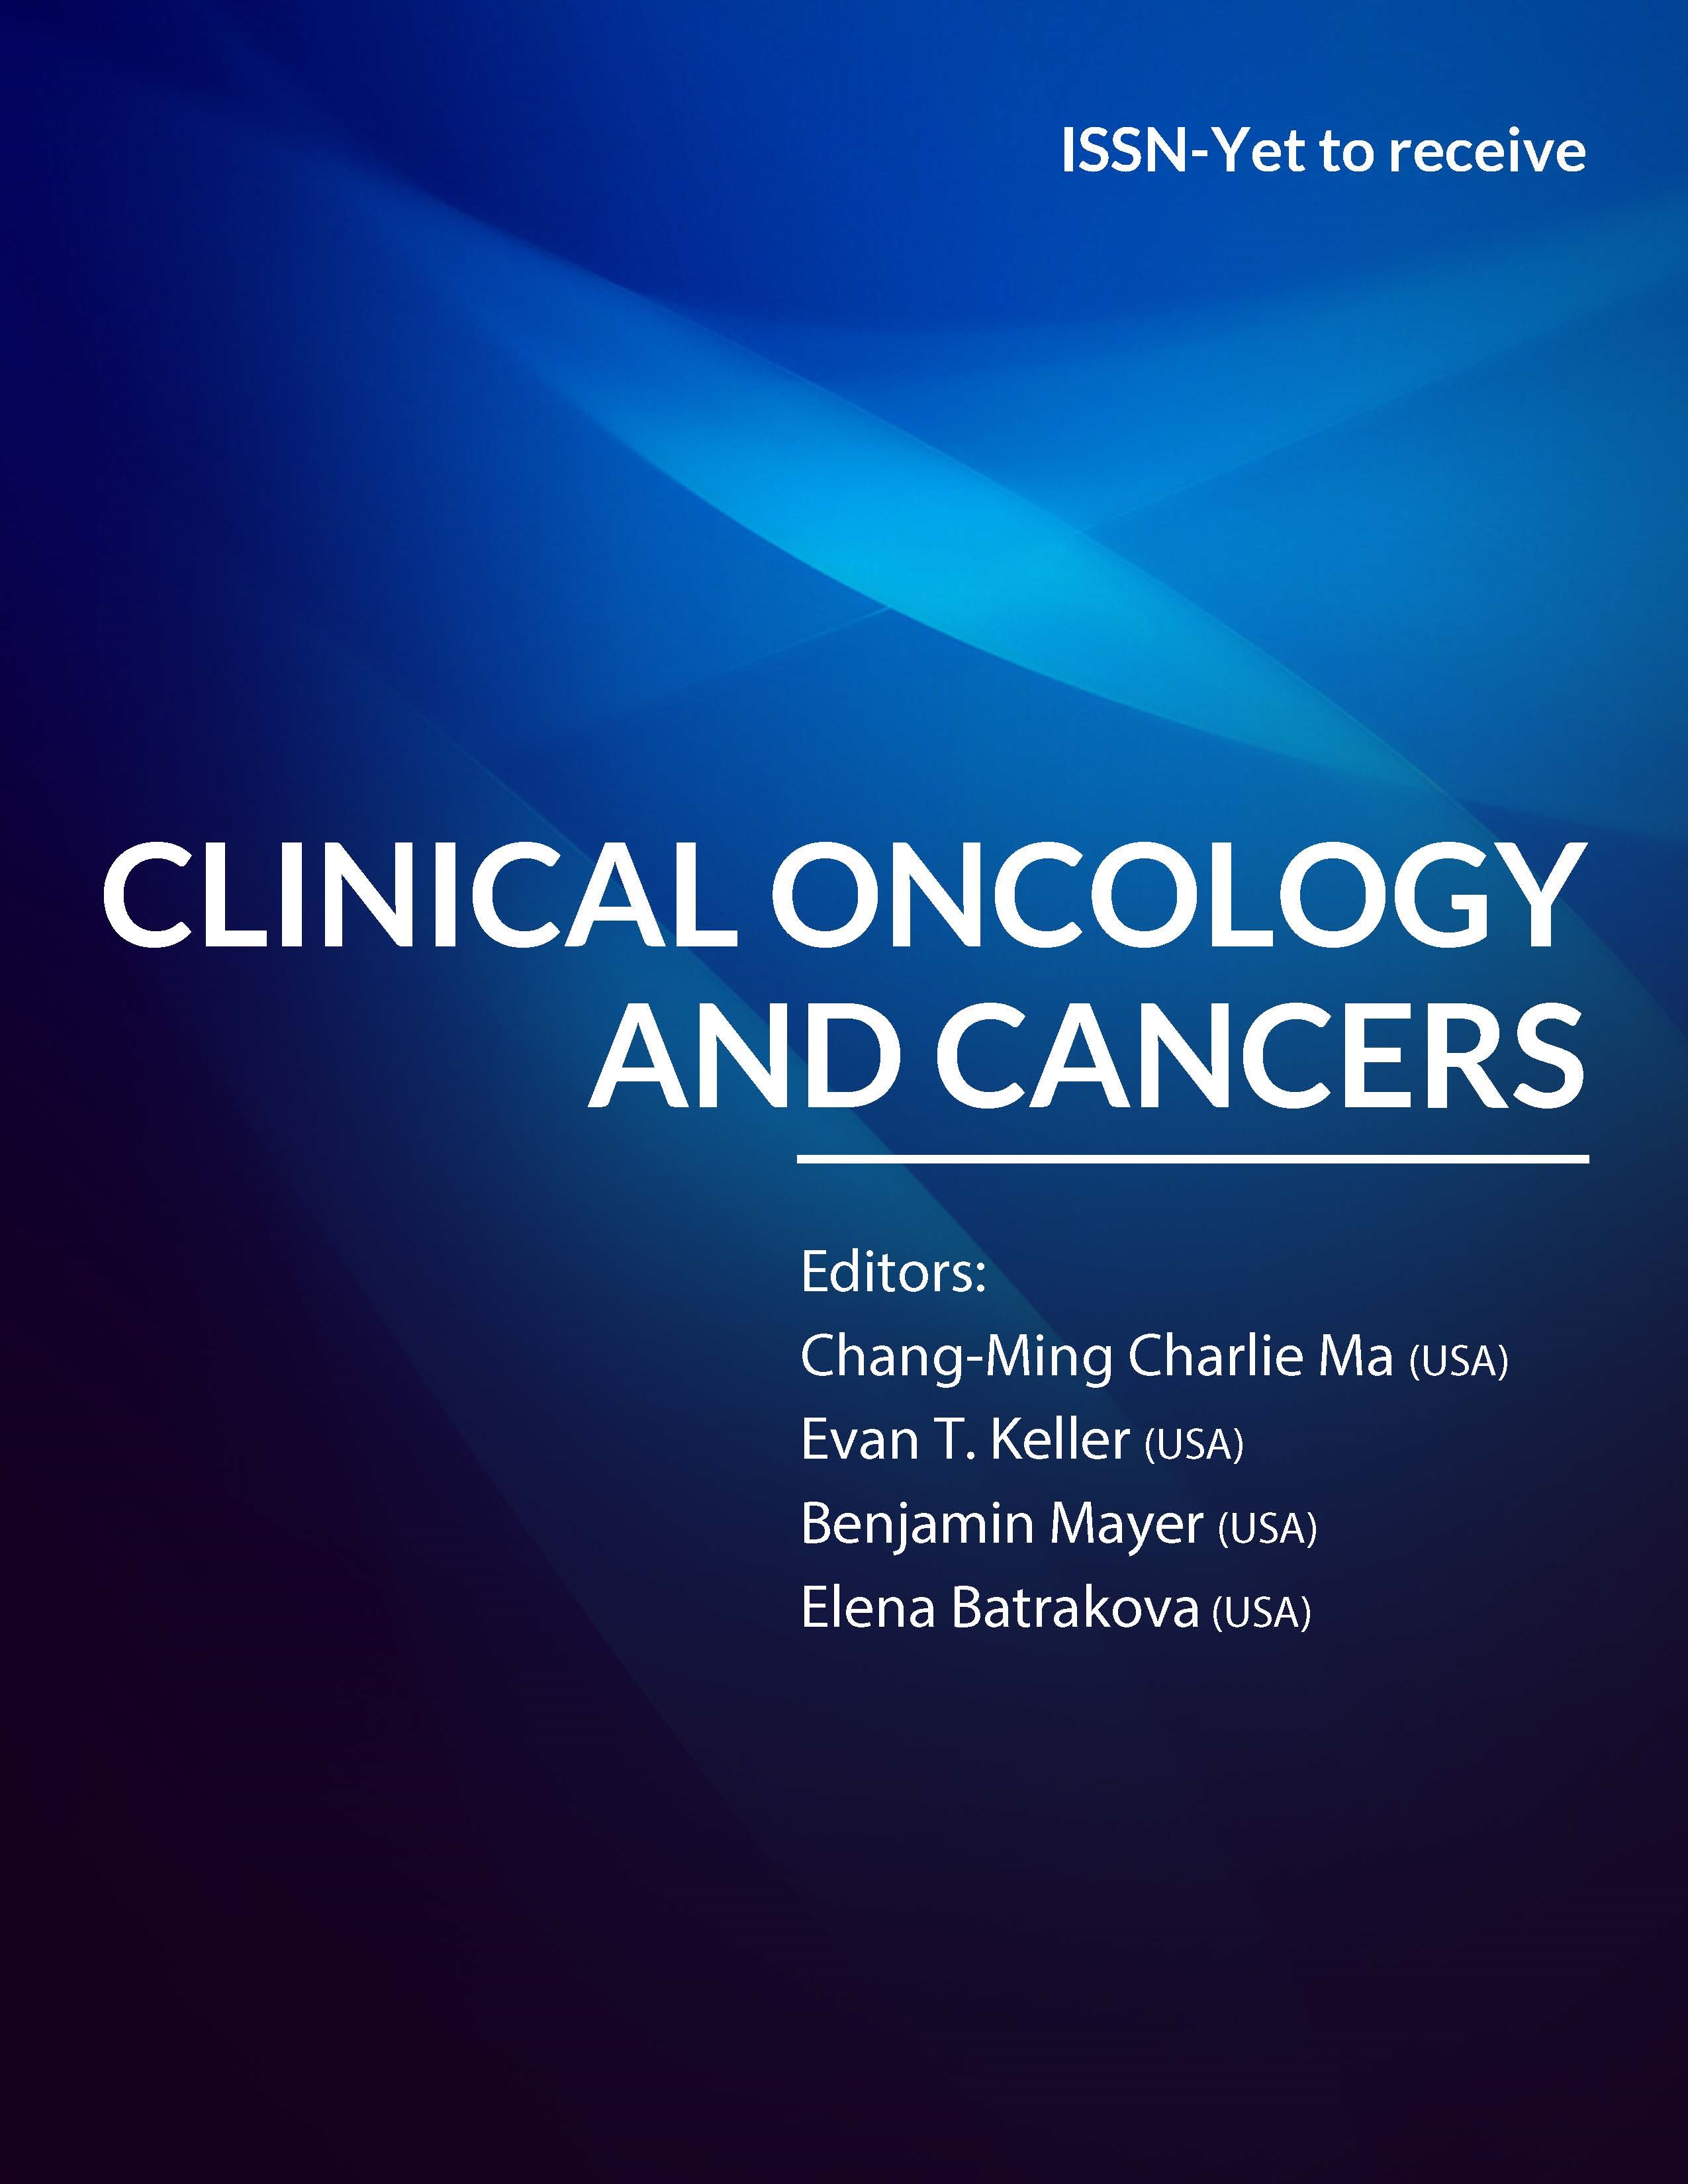 Clinical Oncology and Cancers